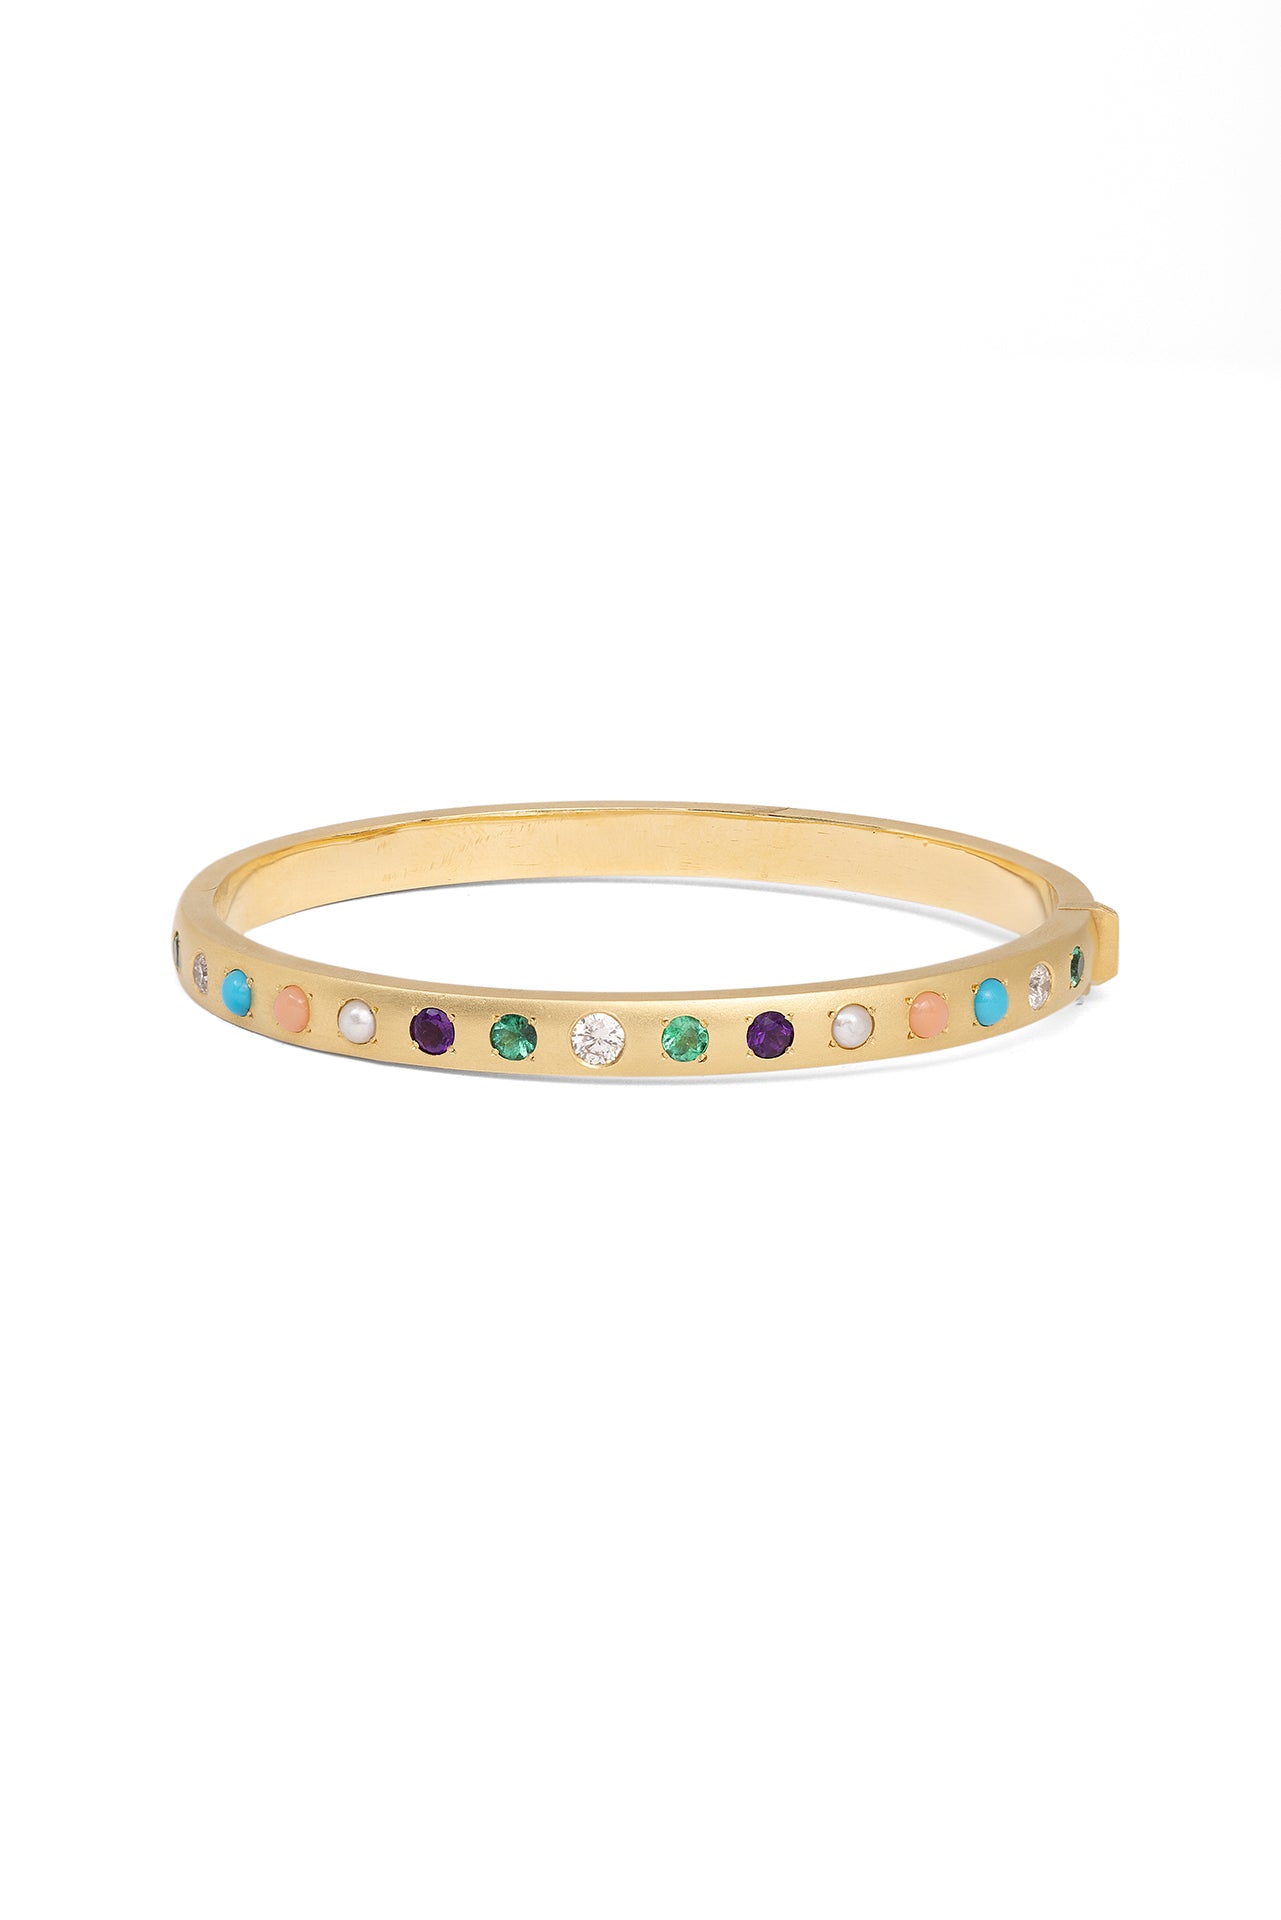 Coral, Amethyst, Turquoise, Emerald and Diamond Gypsy Bangle